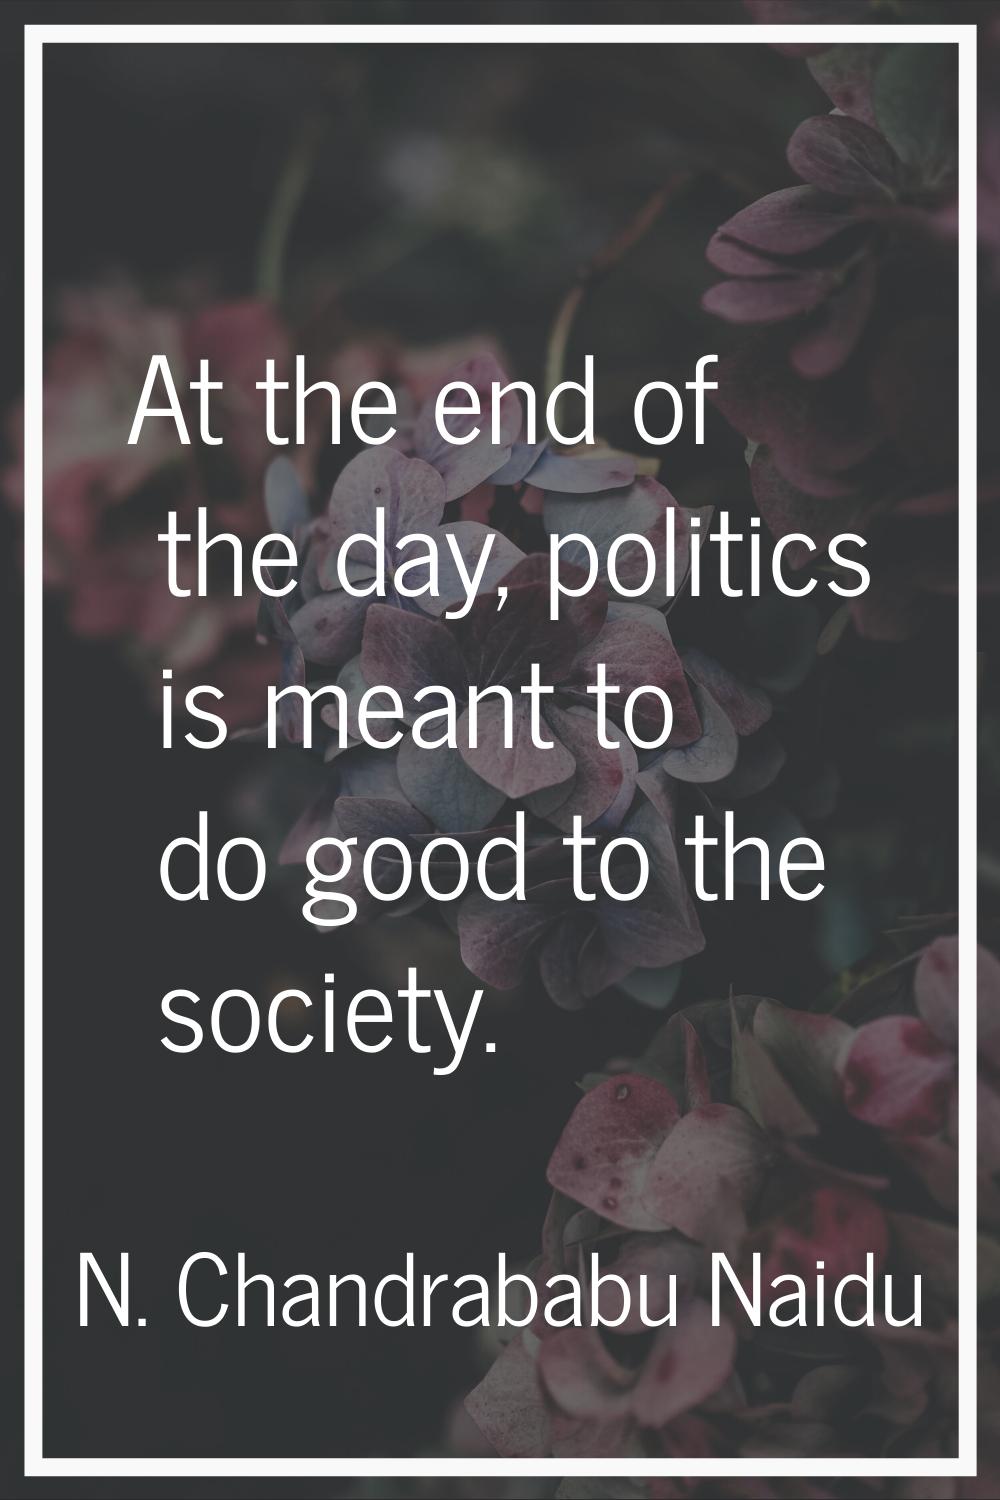 At the end of the day, politics is meant to do good to the society.